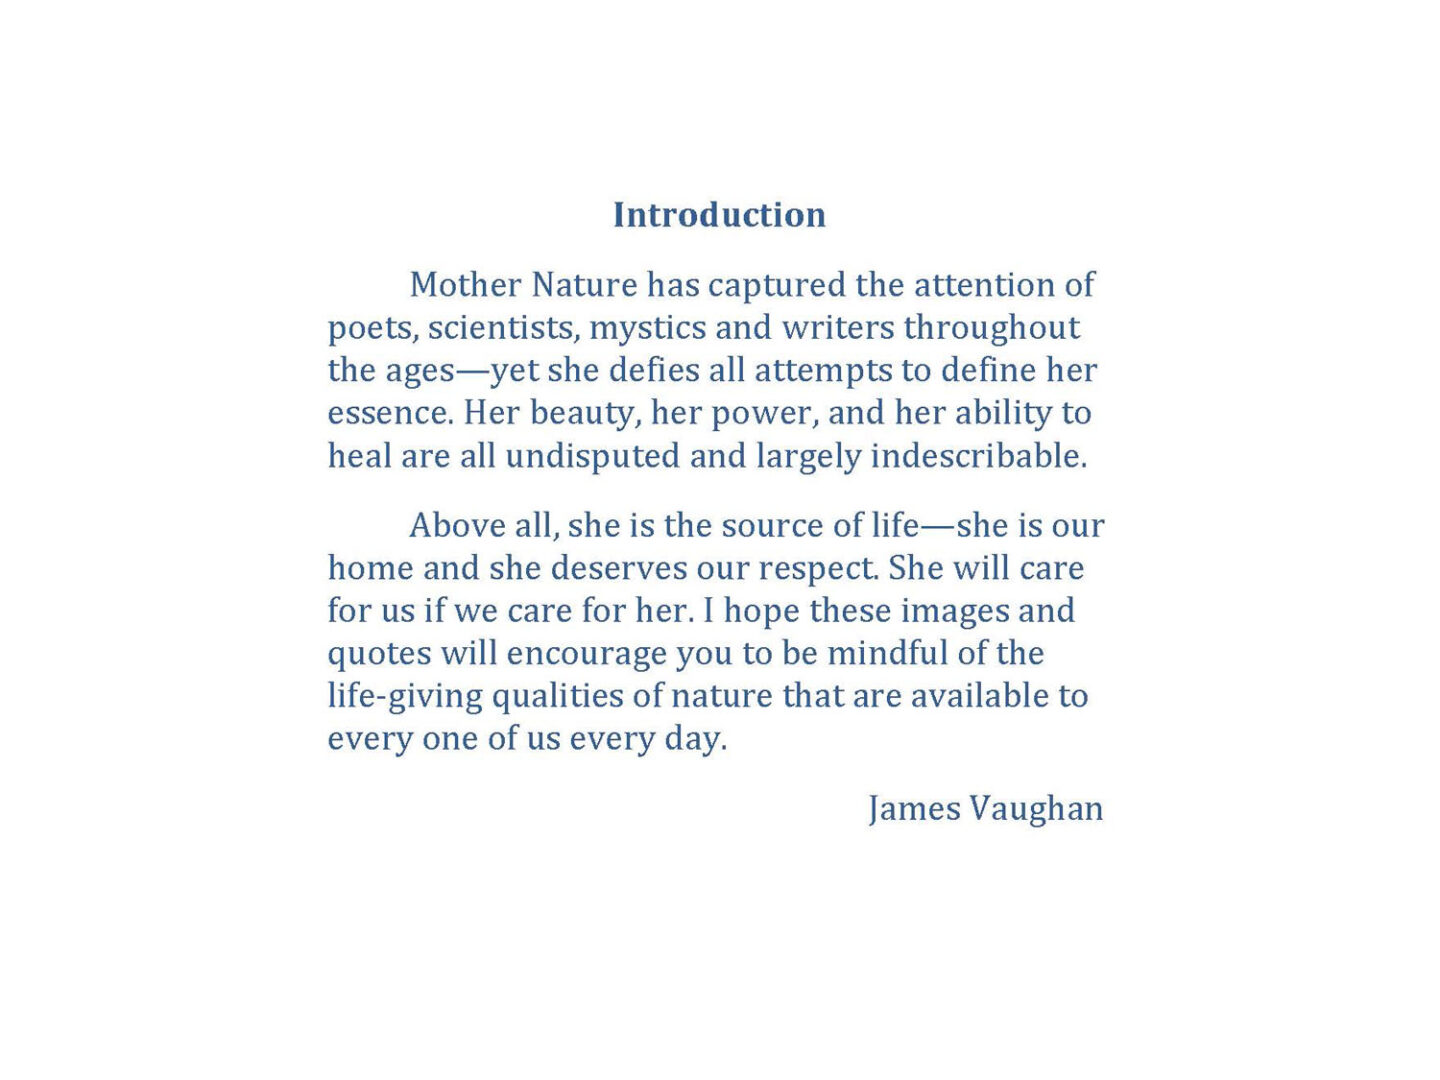 Reflections on Things that Matter by James Vaughan